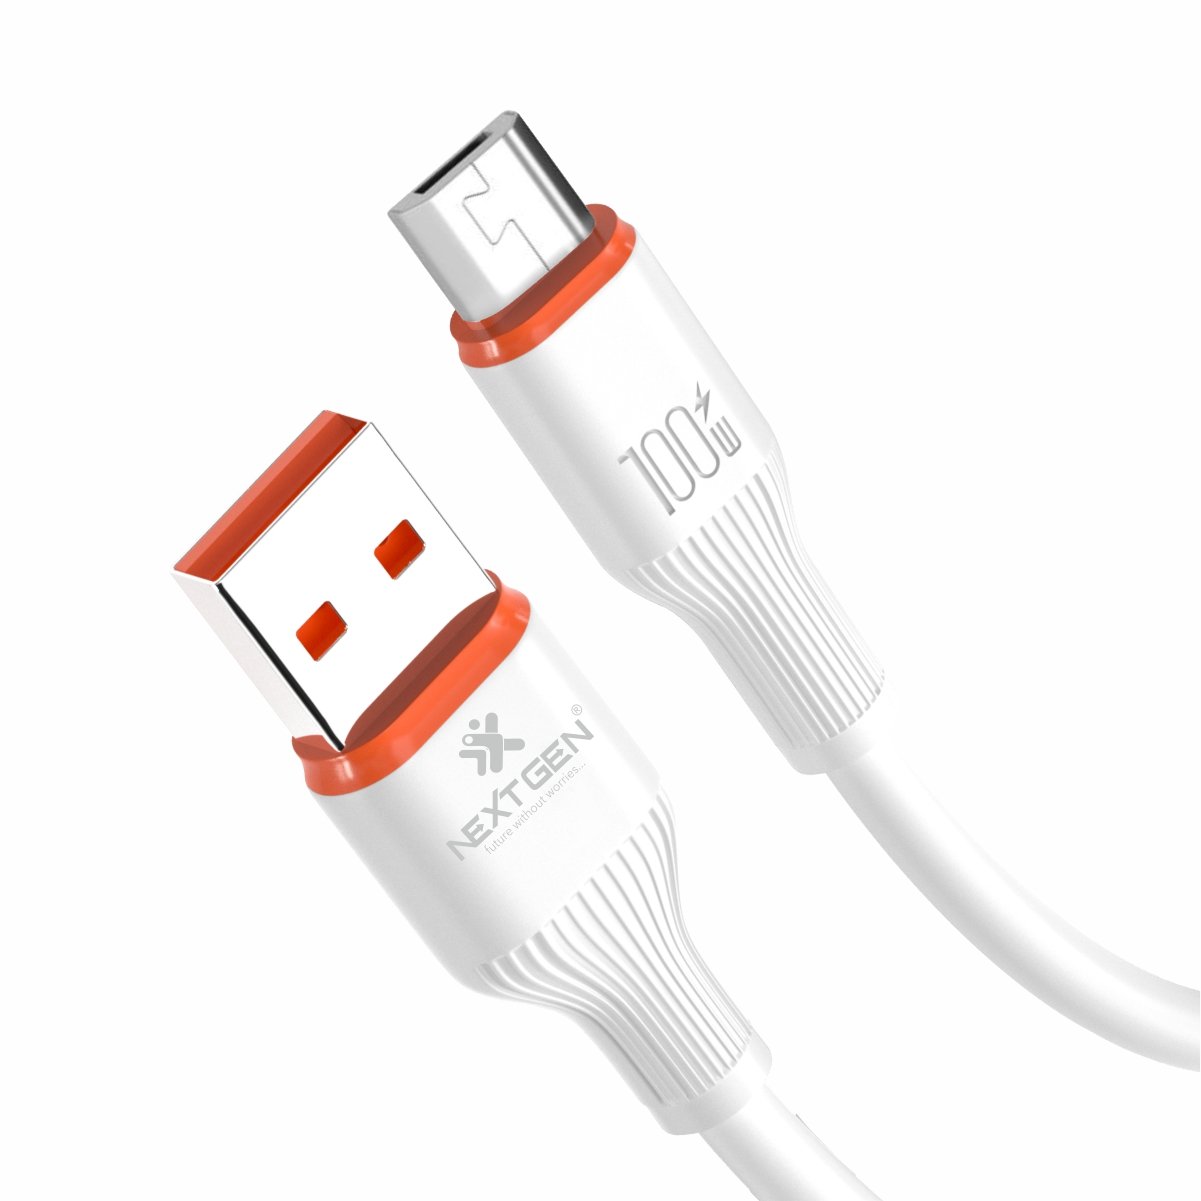 NGDC-545 Micro USB Rapidly Fast Charge & Sync Data Cable